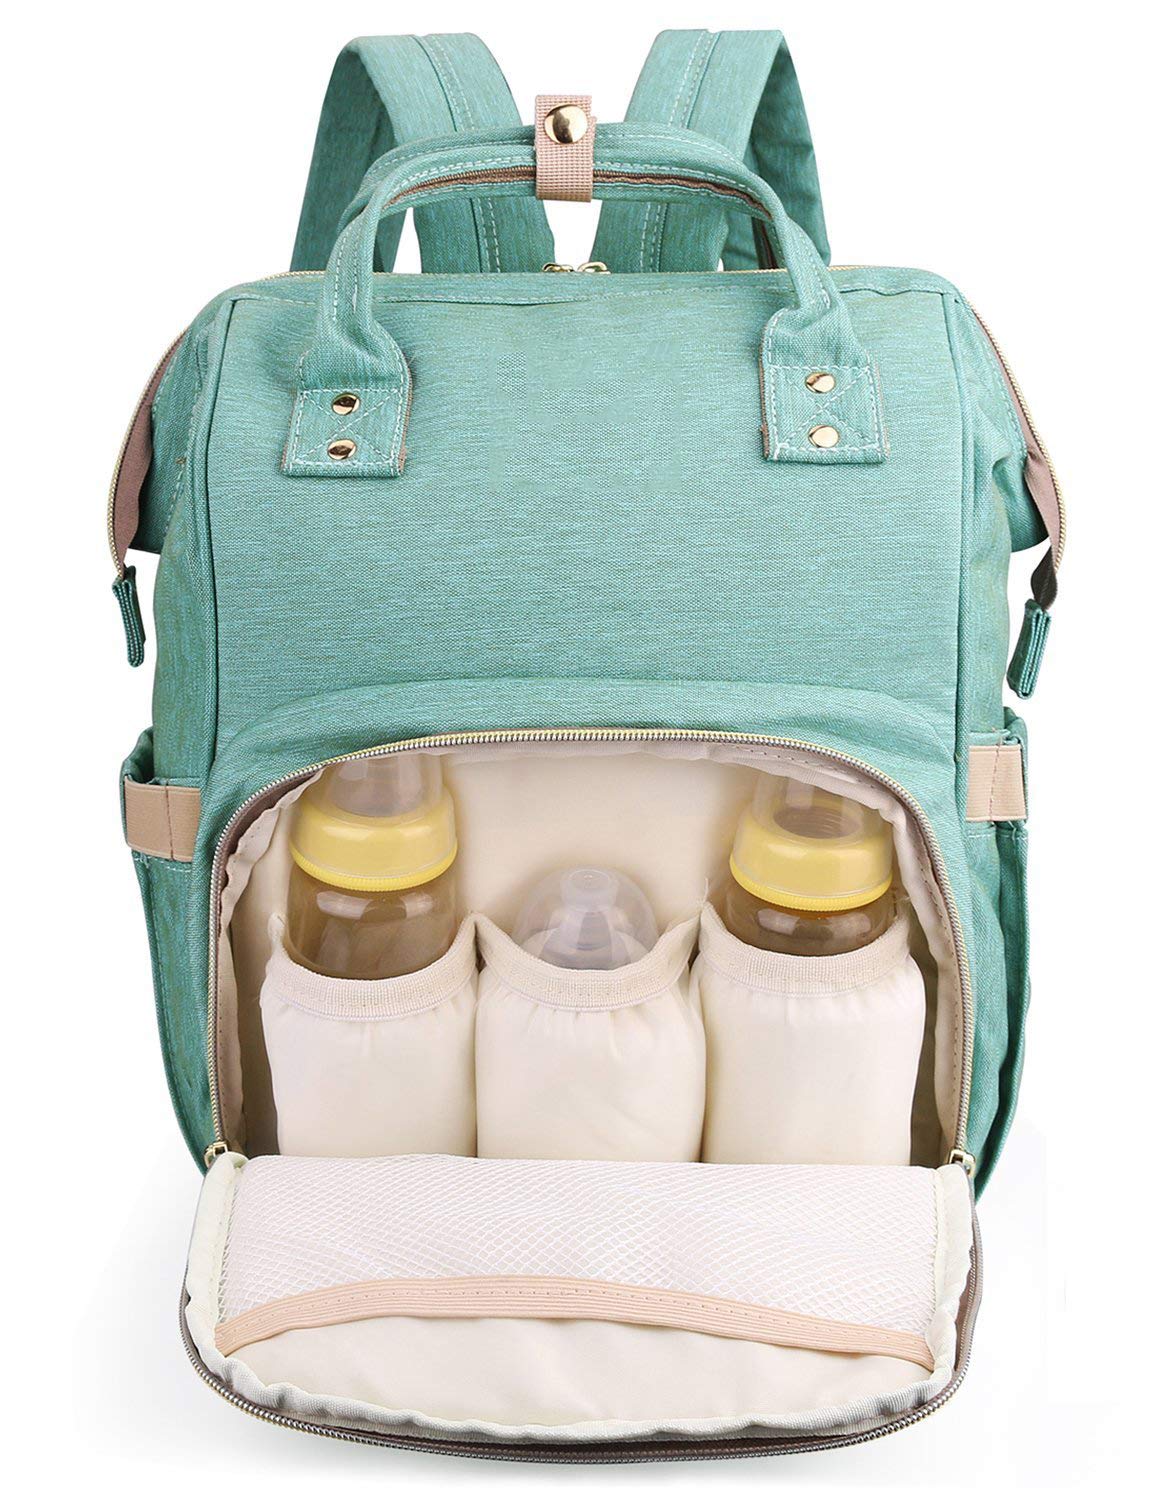 House of Quirk Baby Diaper Bag